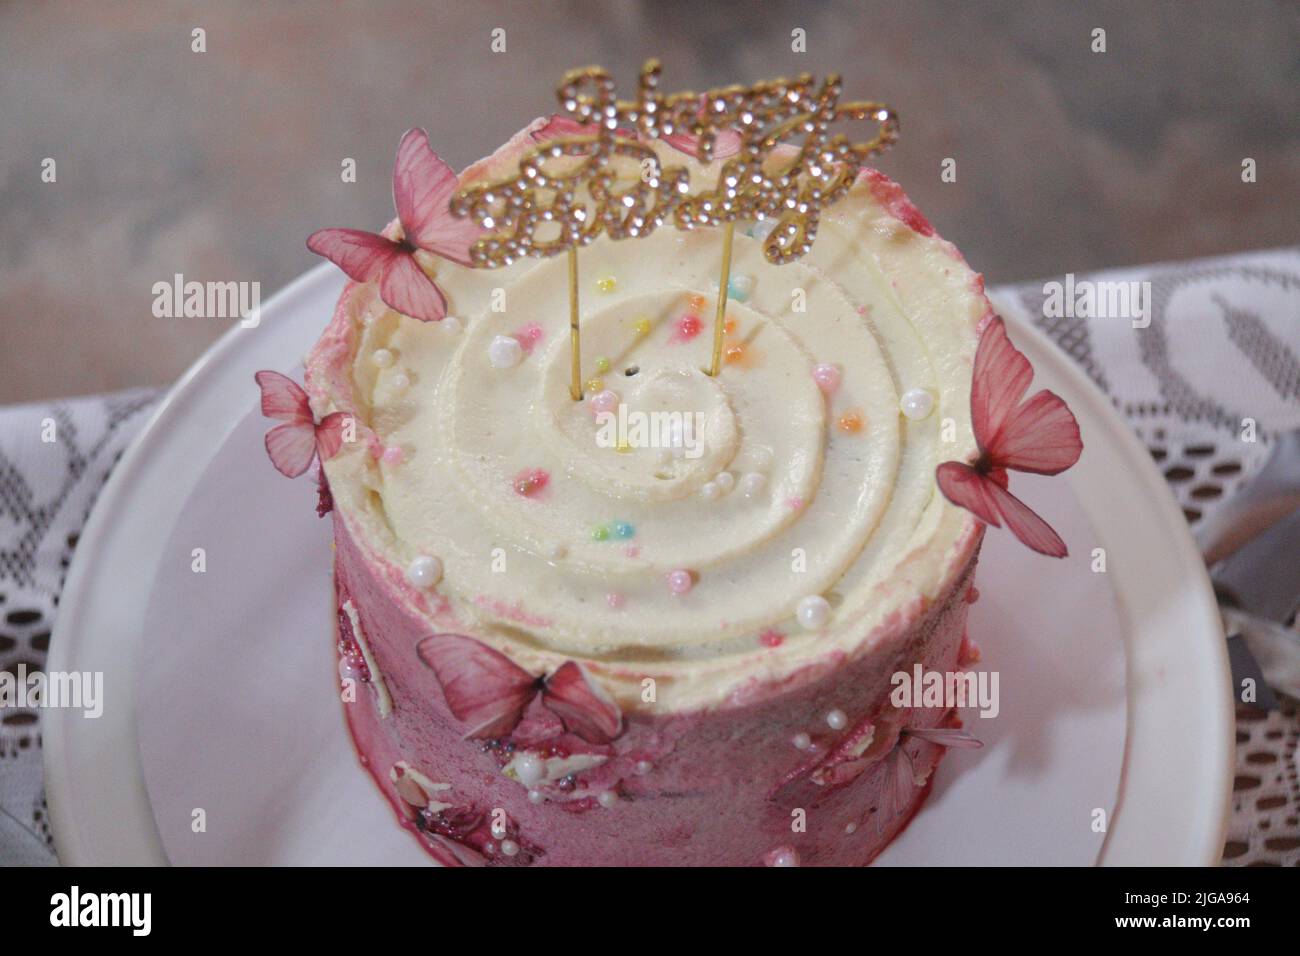 Birthday Cakes, Soft and rich with icing. Stock Photo